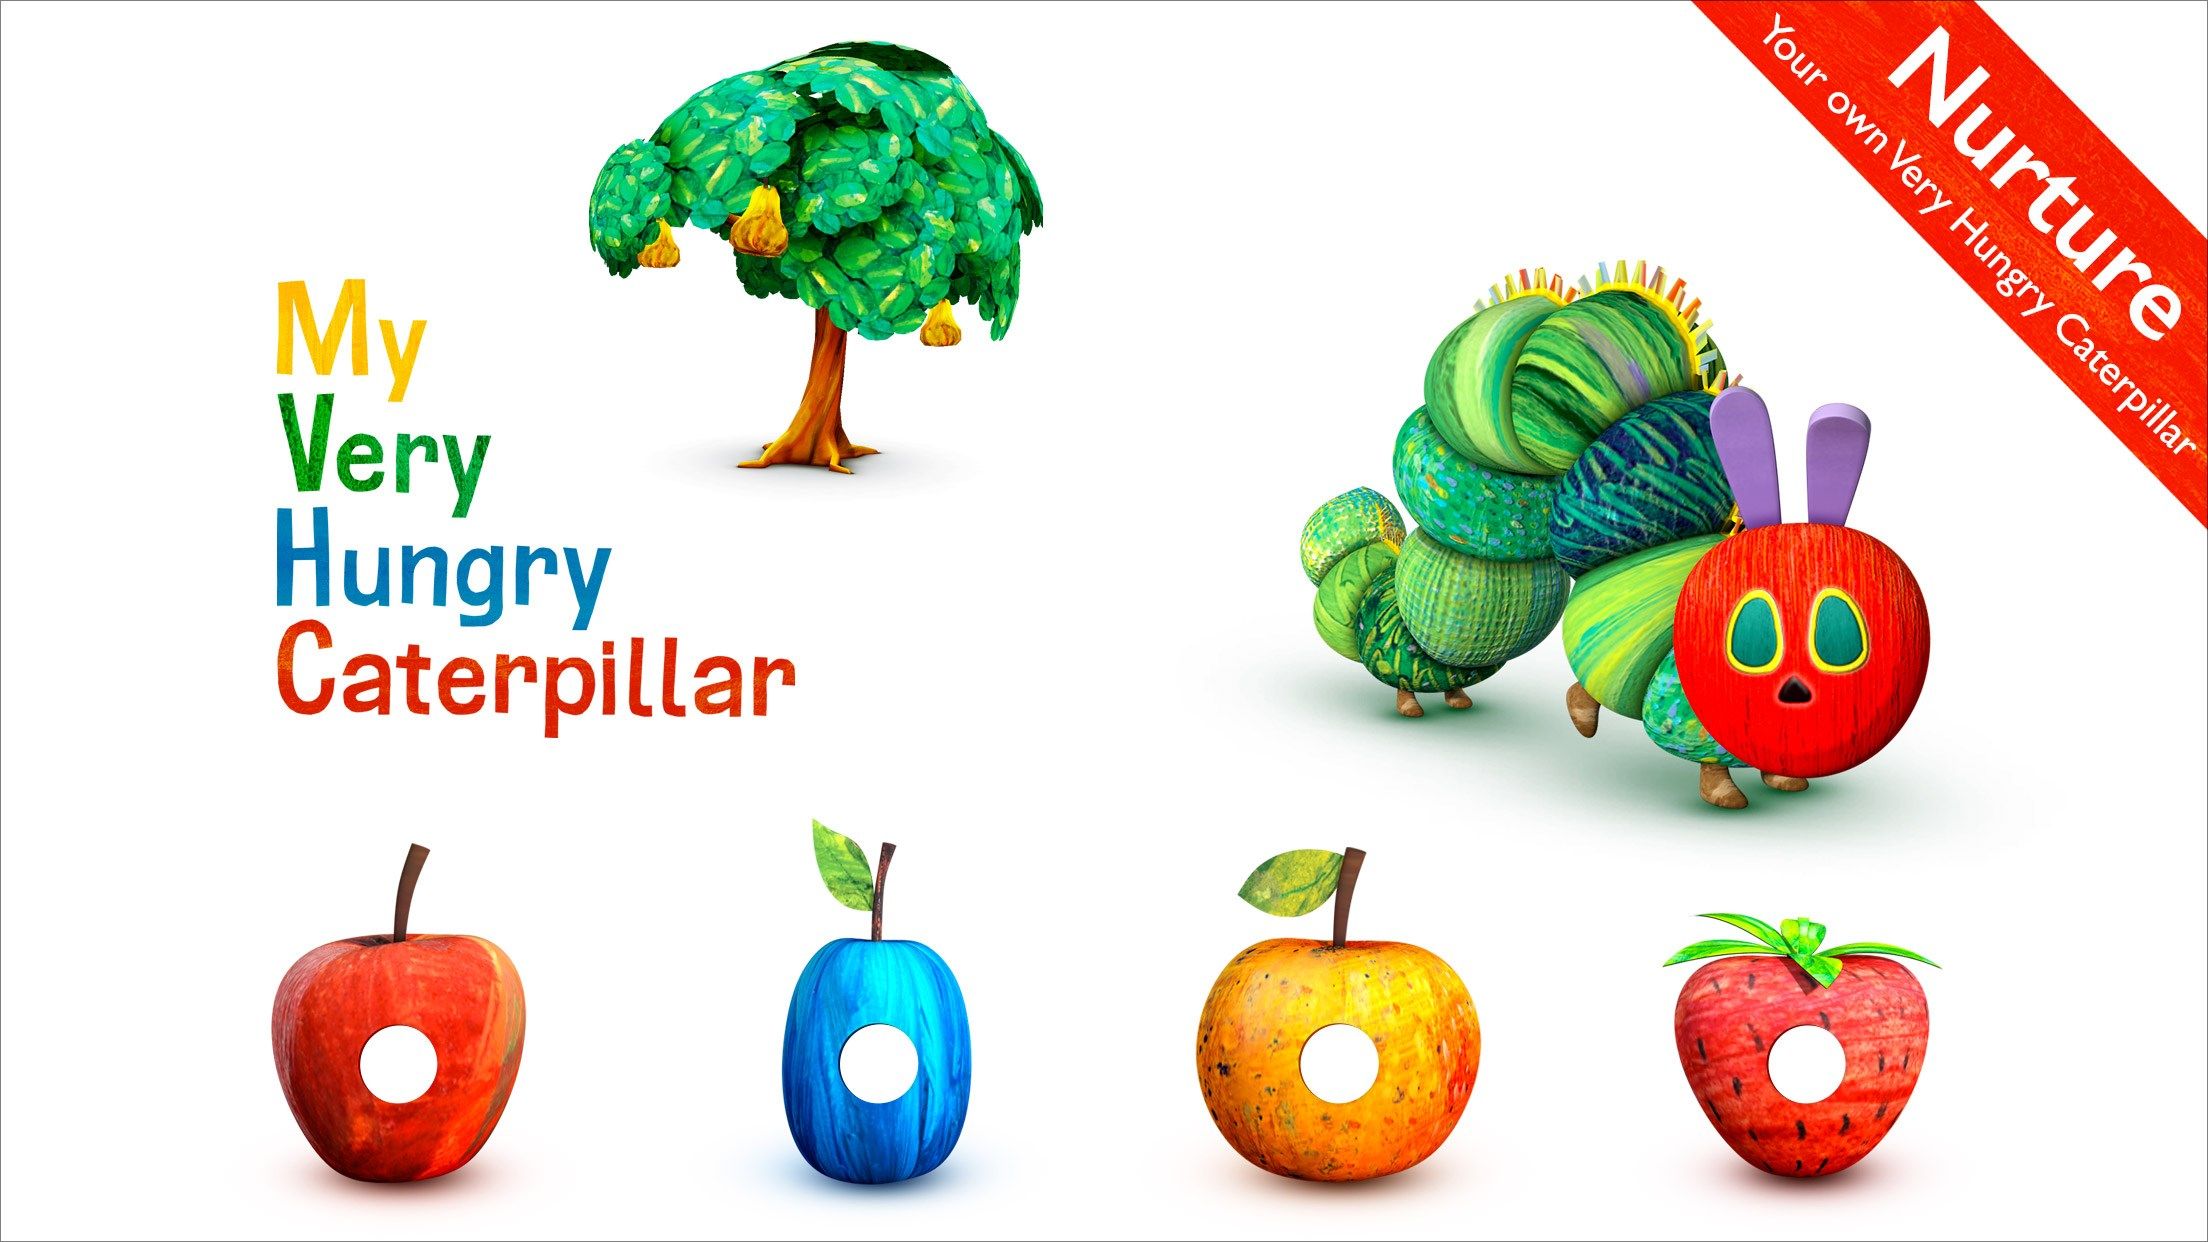 Nurture: your own Very Hungry Caterpillar